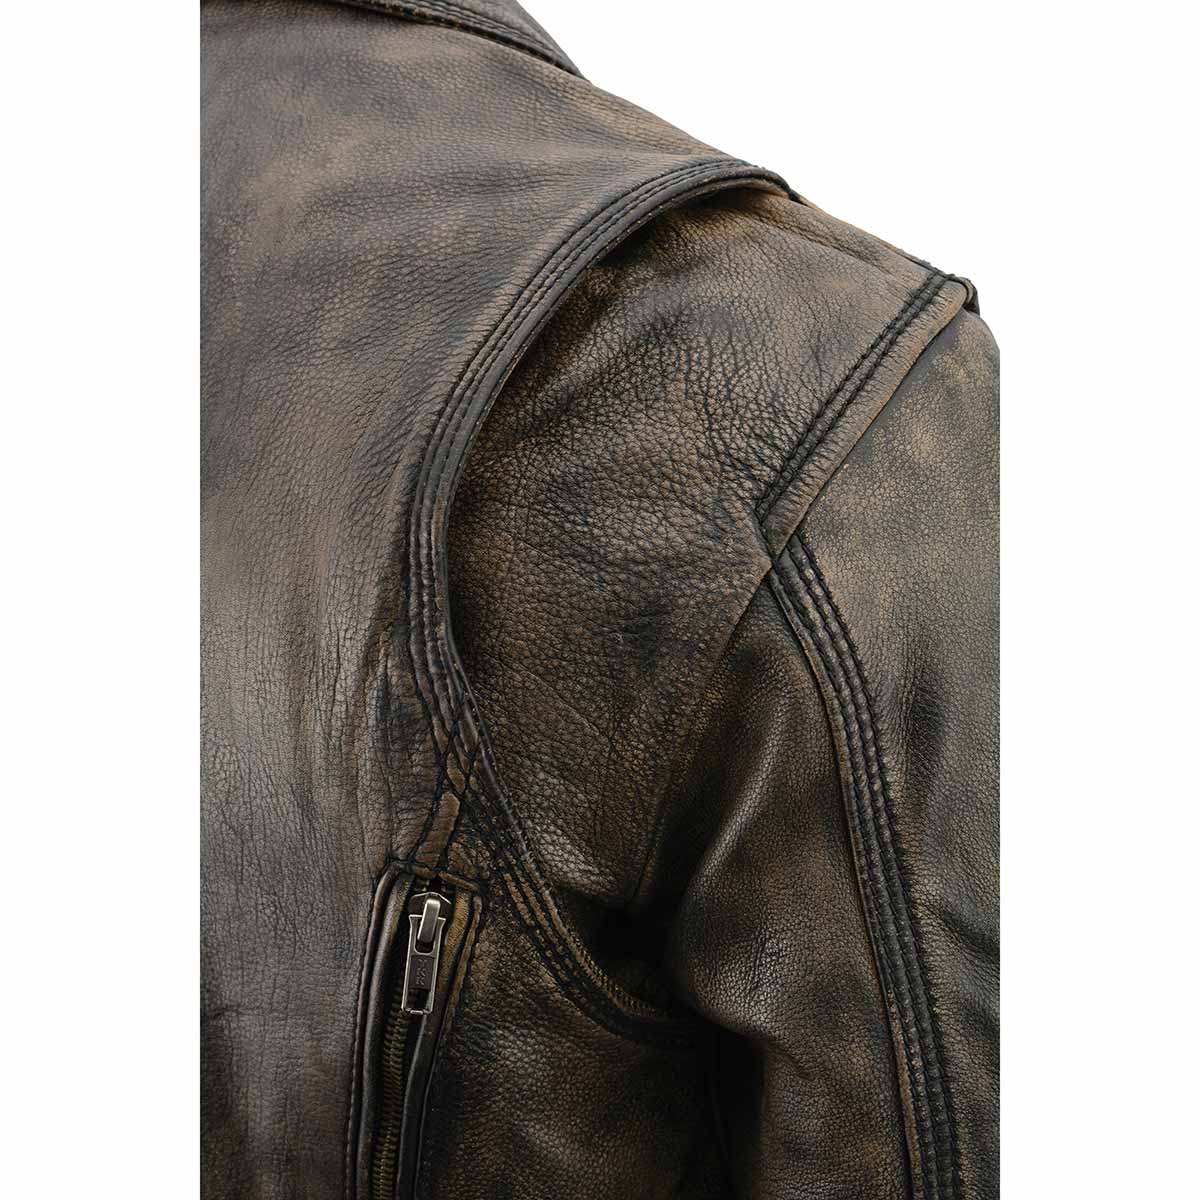 Men's Distressed Brown Triple Stitched Motorcycle Leather Jacket - Police Style Jacket